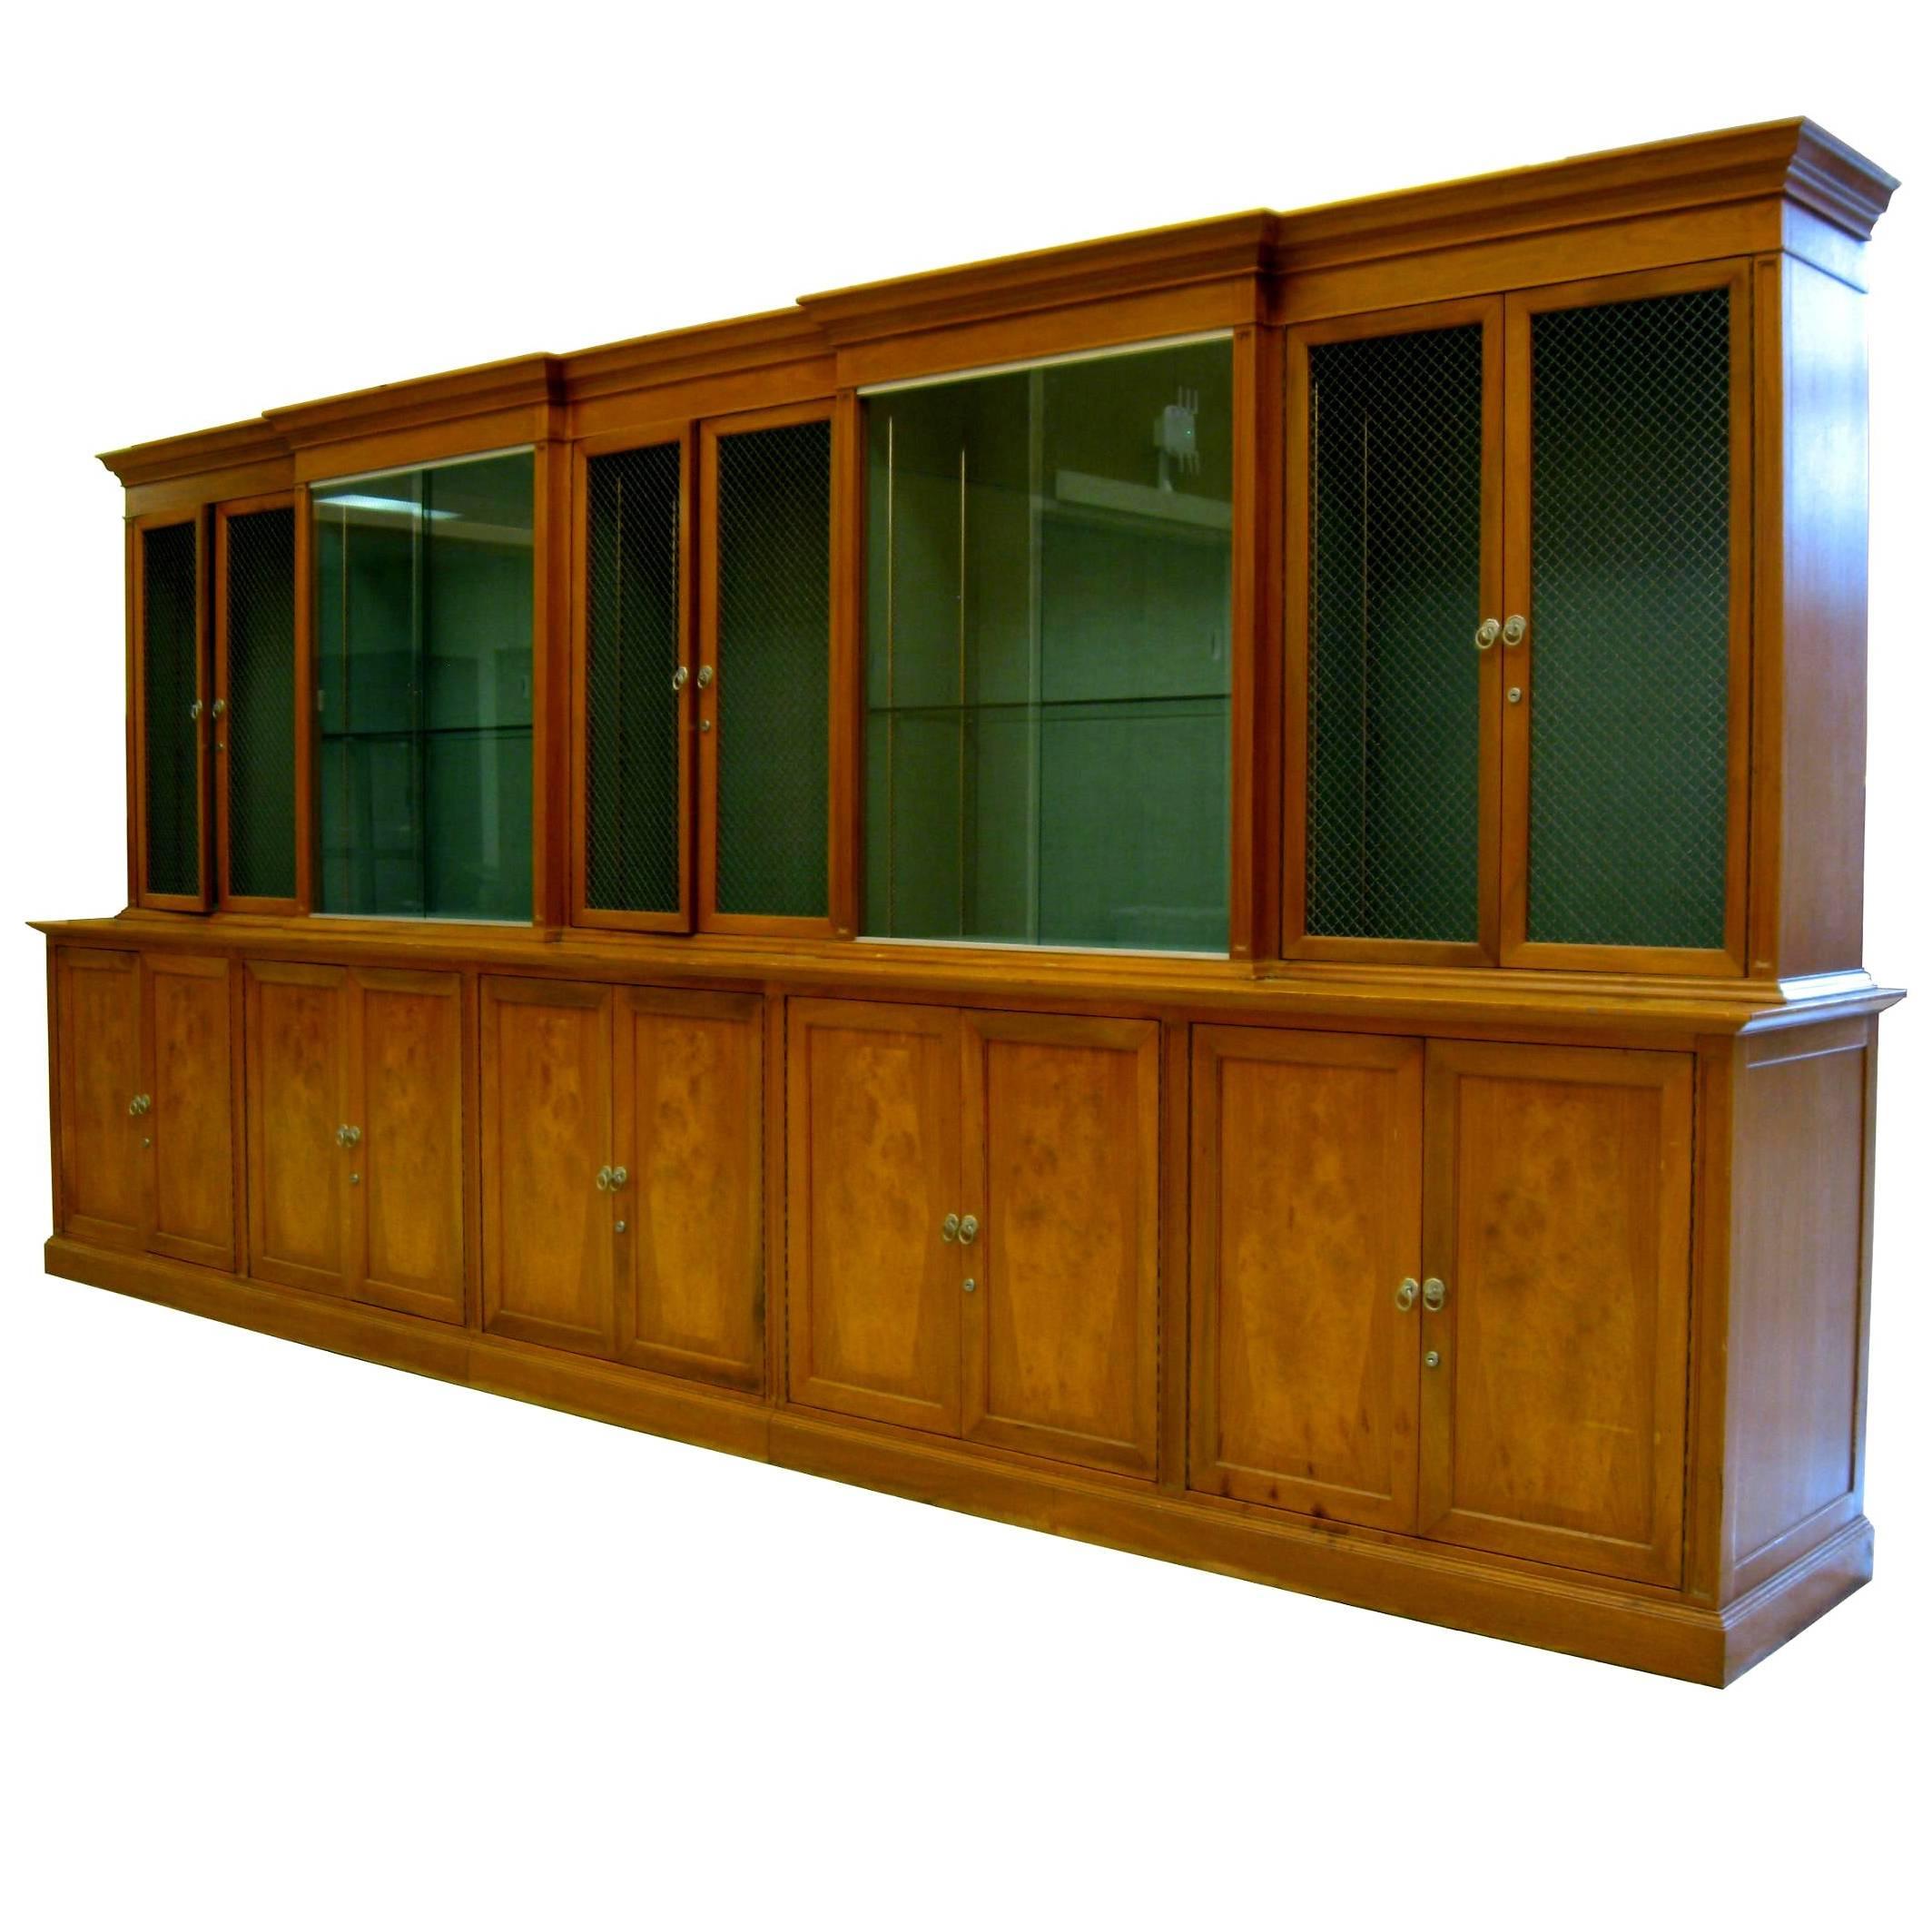 These spectacular Wall units by Romweber feature an interesting mix of Classical and Mid-Century Modern details reminiscent of Harold Schwartz designs. Shown is one of two matching 15 ft long cabinets and both are available for sale (priced per